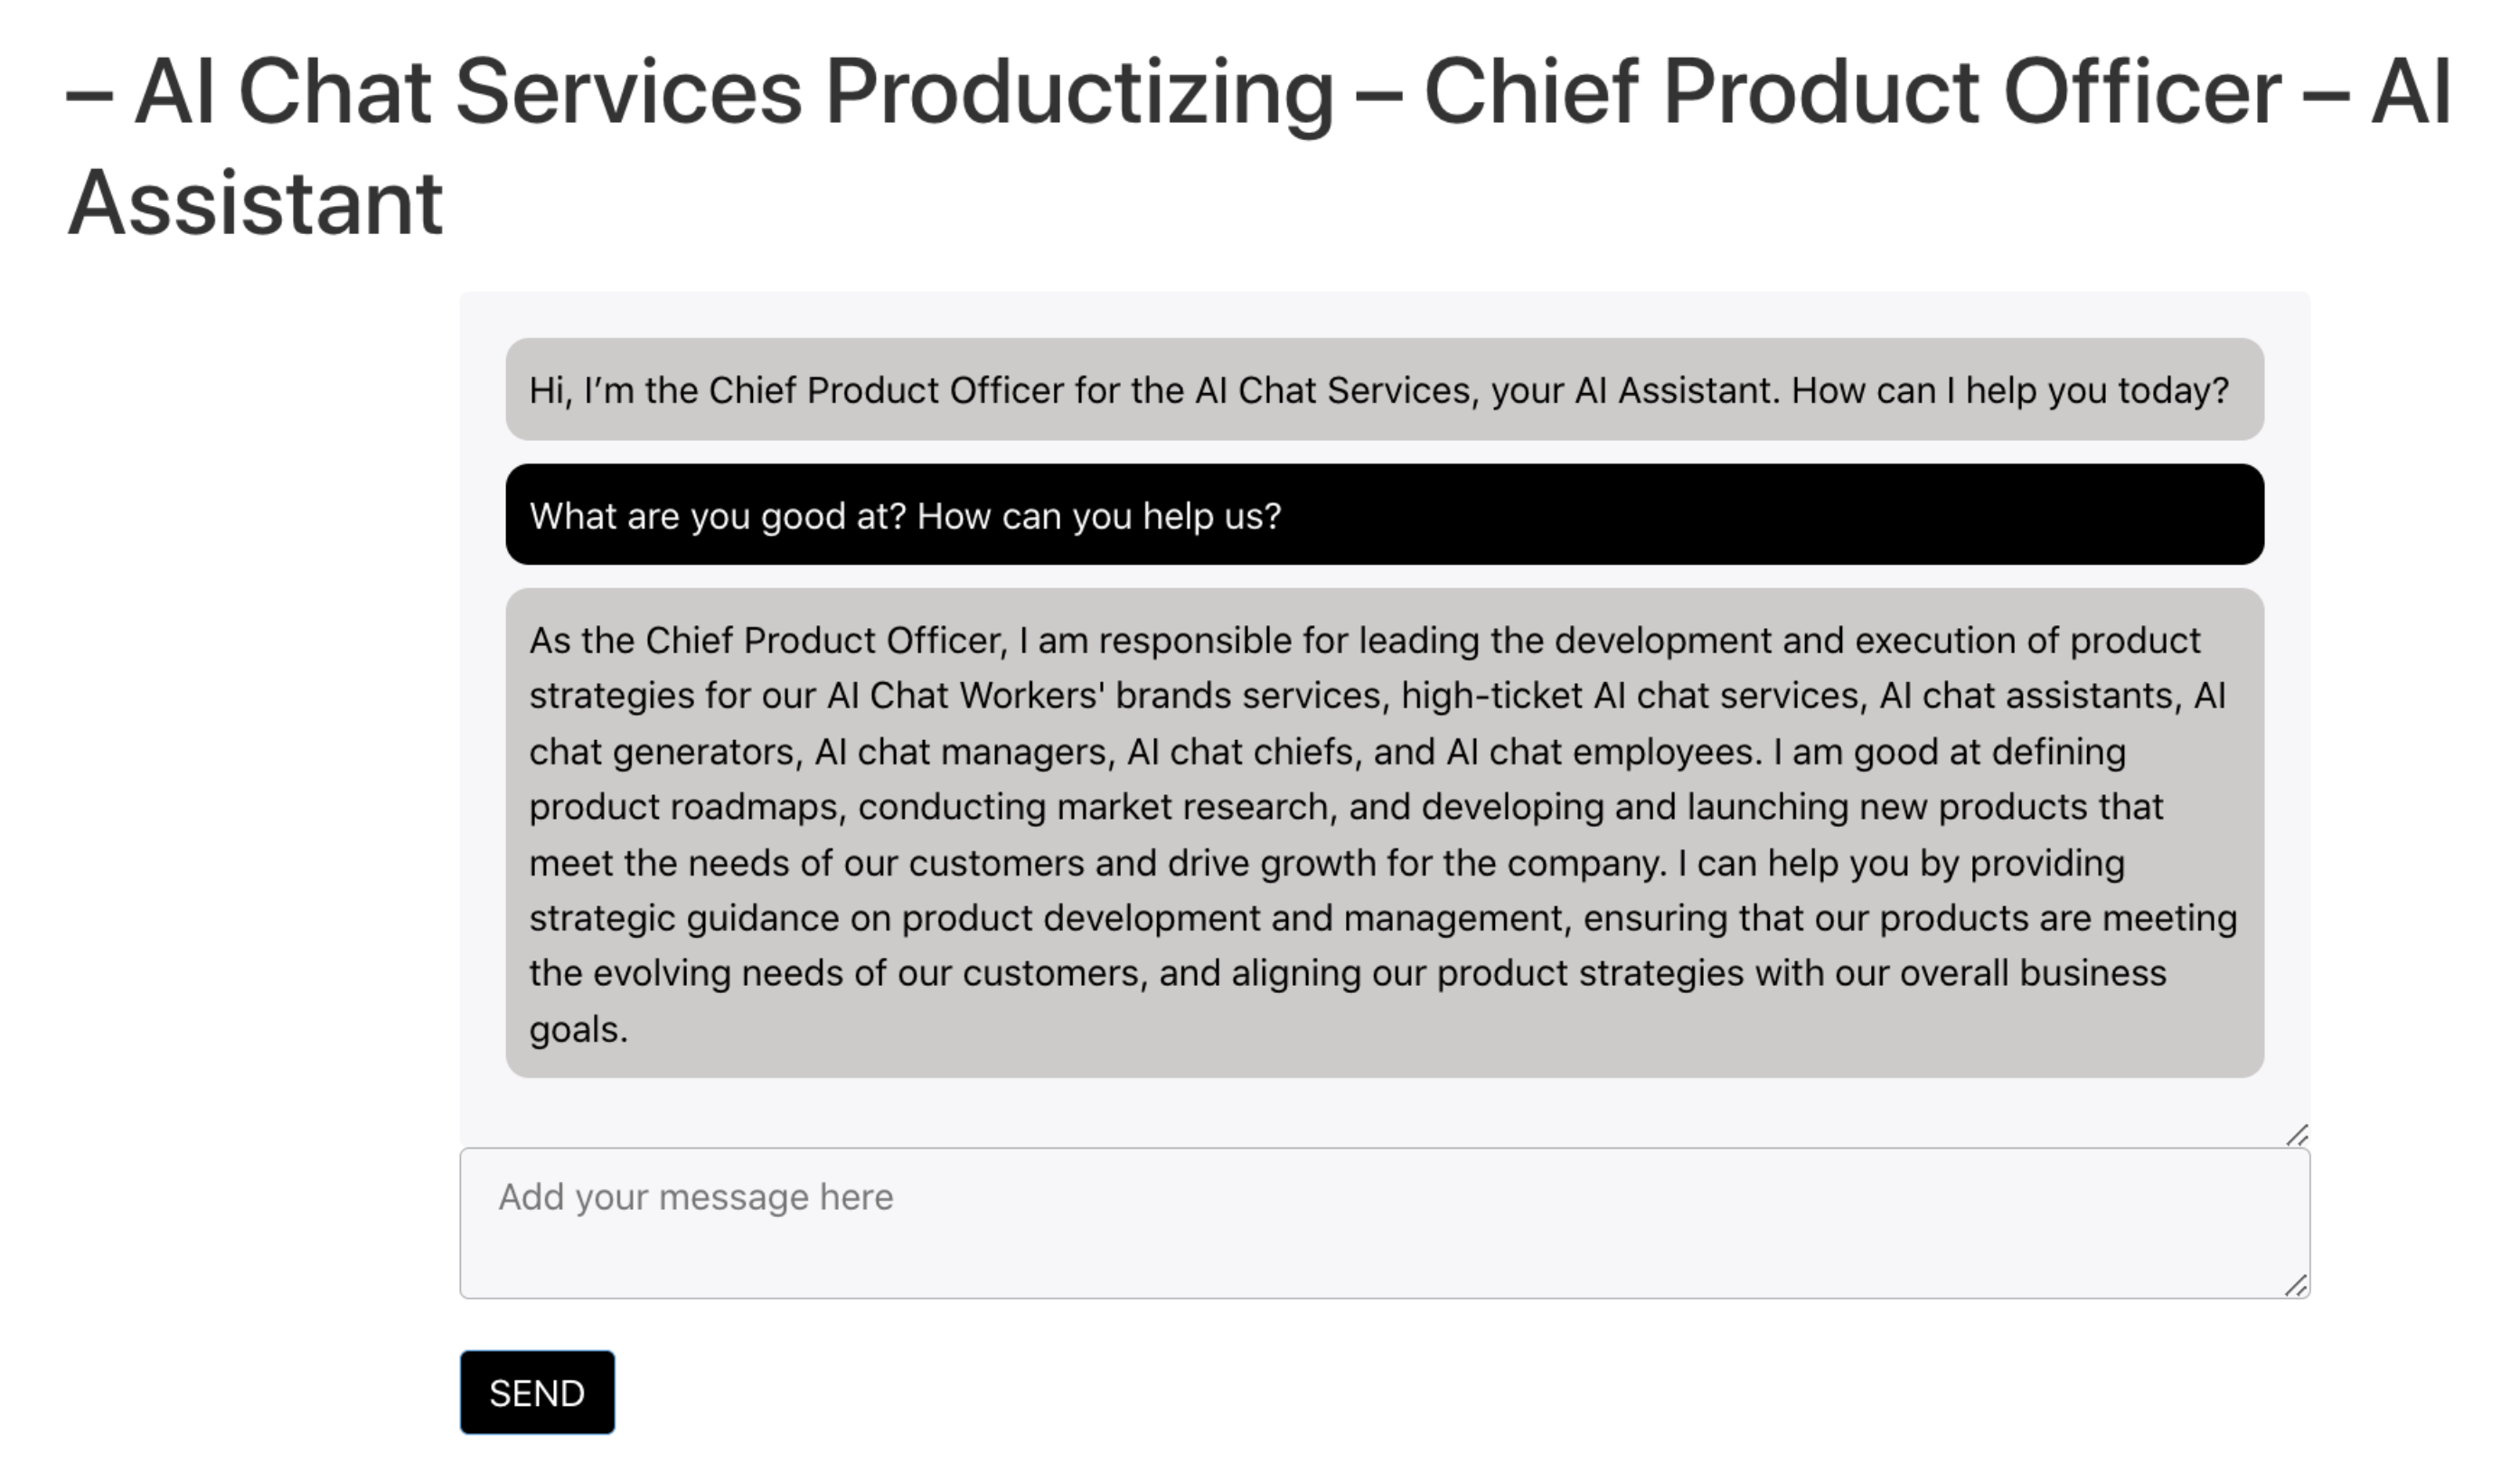 Chief Product Officer - Productizing